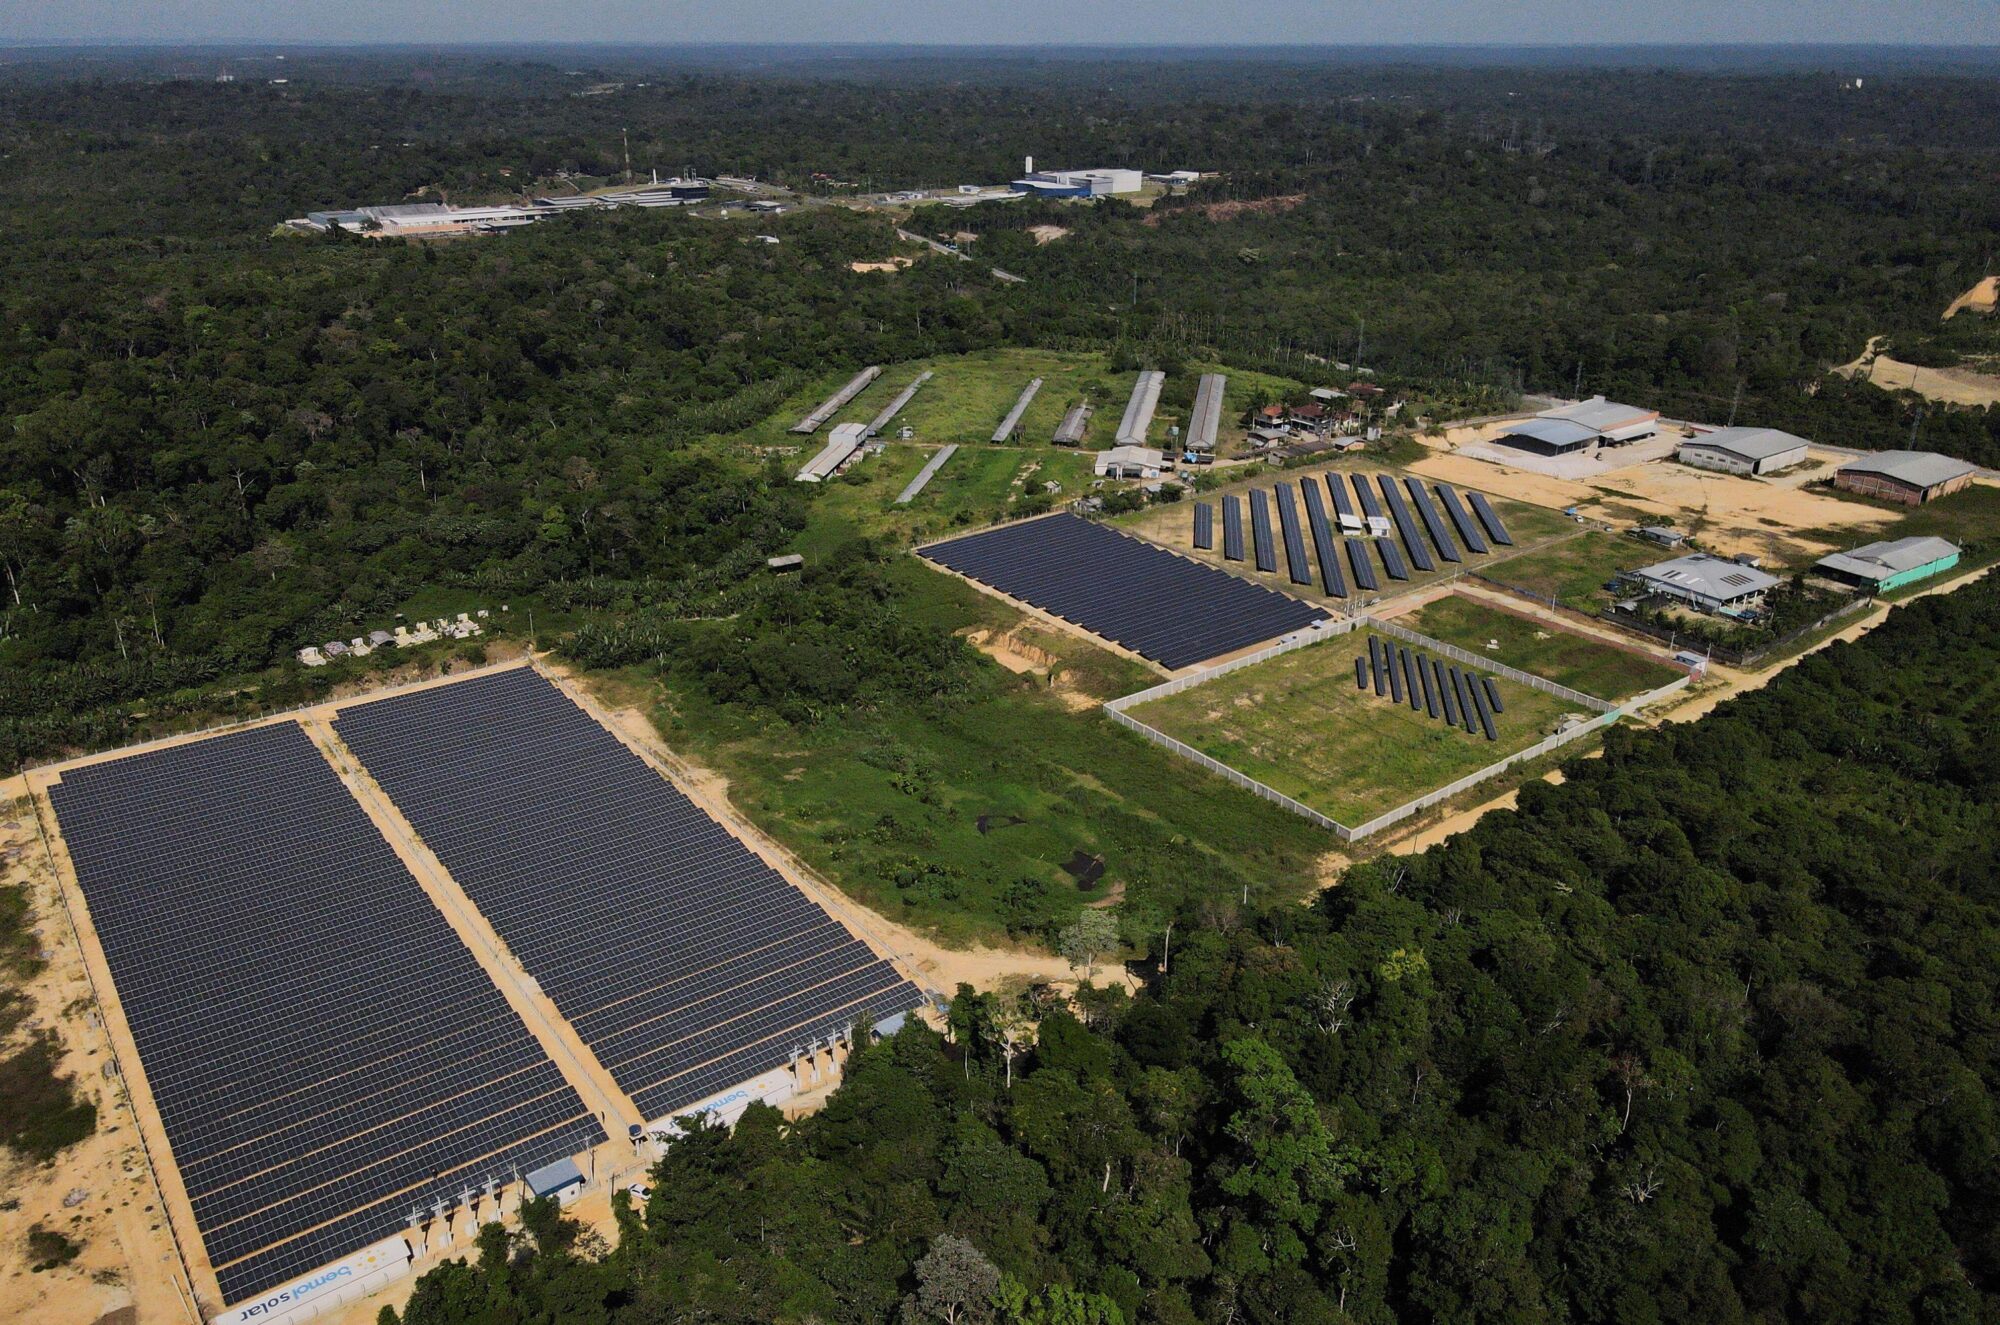 aerial view of a solar power plant